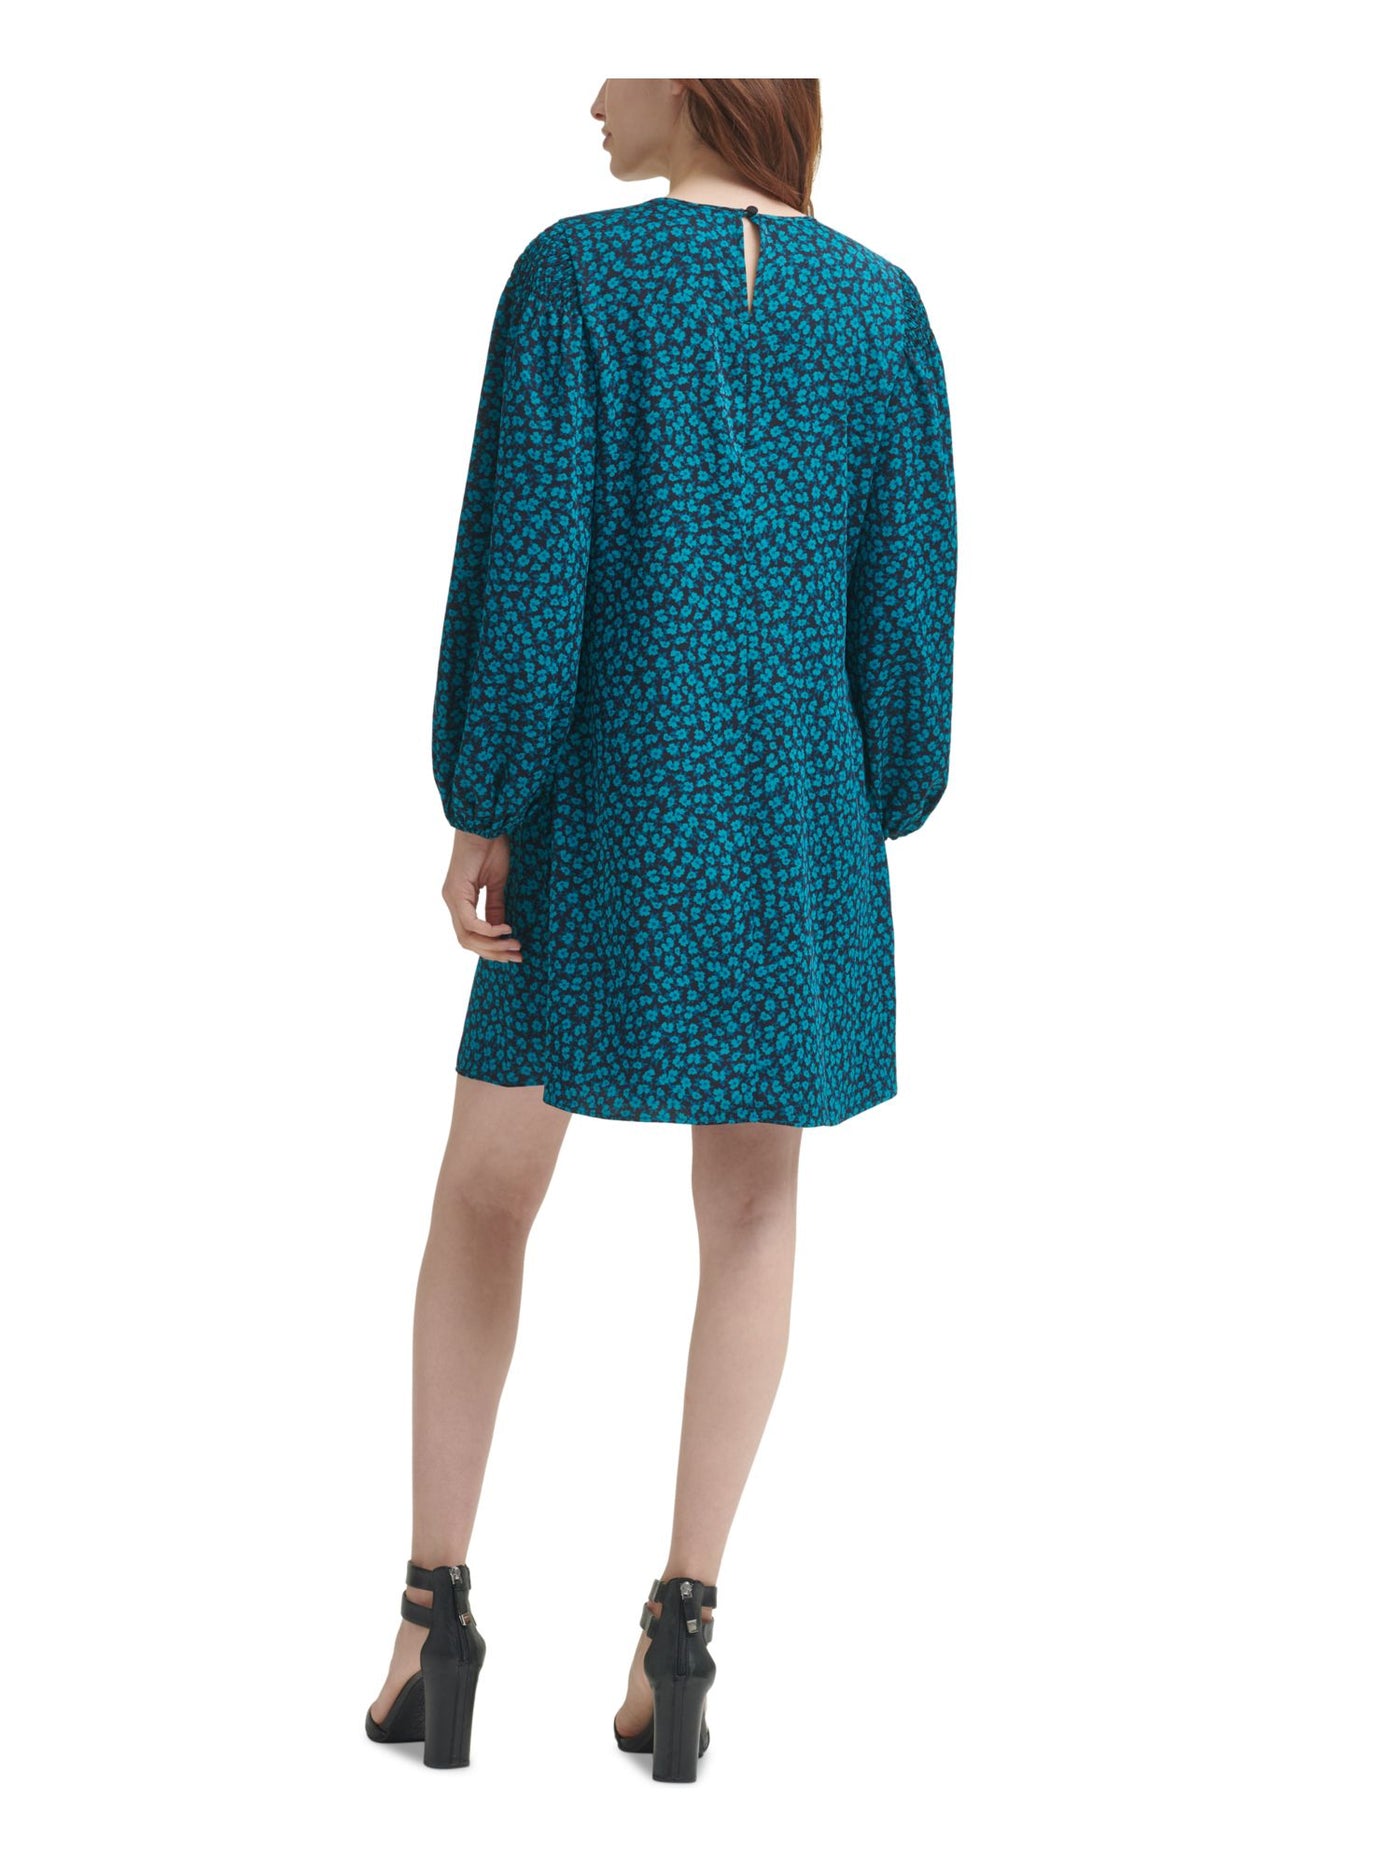 DKNY Womens Teal Smocked Floral Long Sleeve Round Neck Short Evening Shift Dress 12